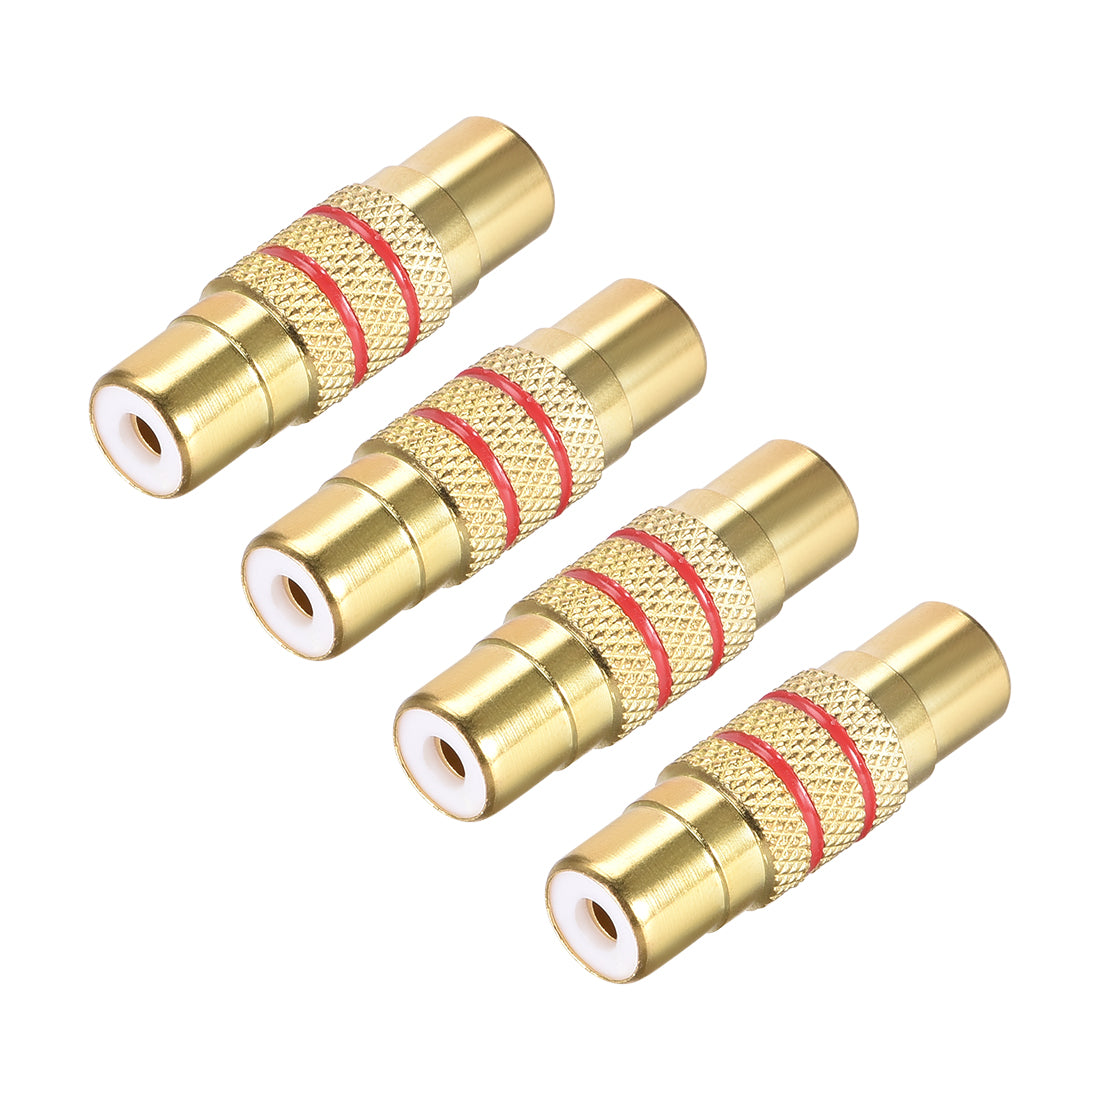 uxcell Uxcell RCA Female to Female Connector Adapter Coupler for Stereo Audio Video AV TV Cable Convert 4Pcs Gold Tone